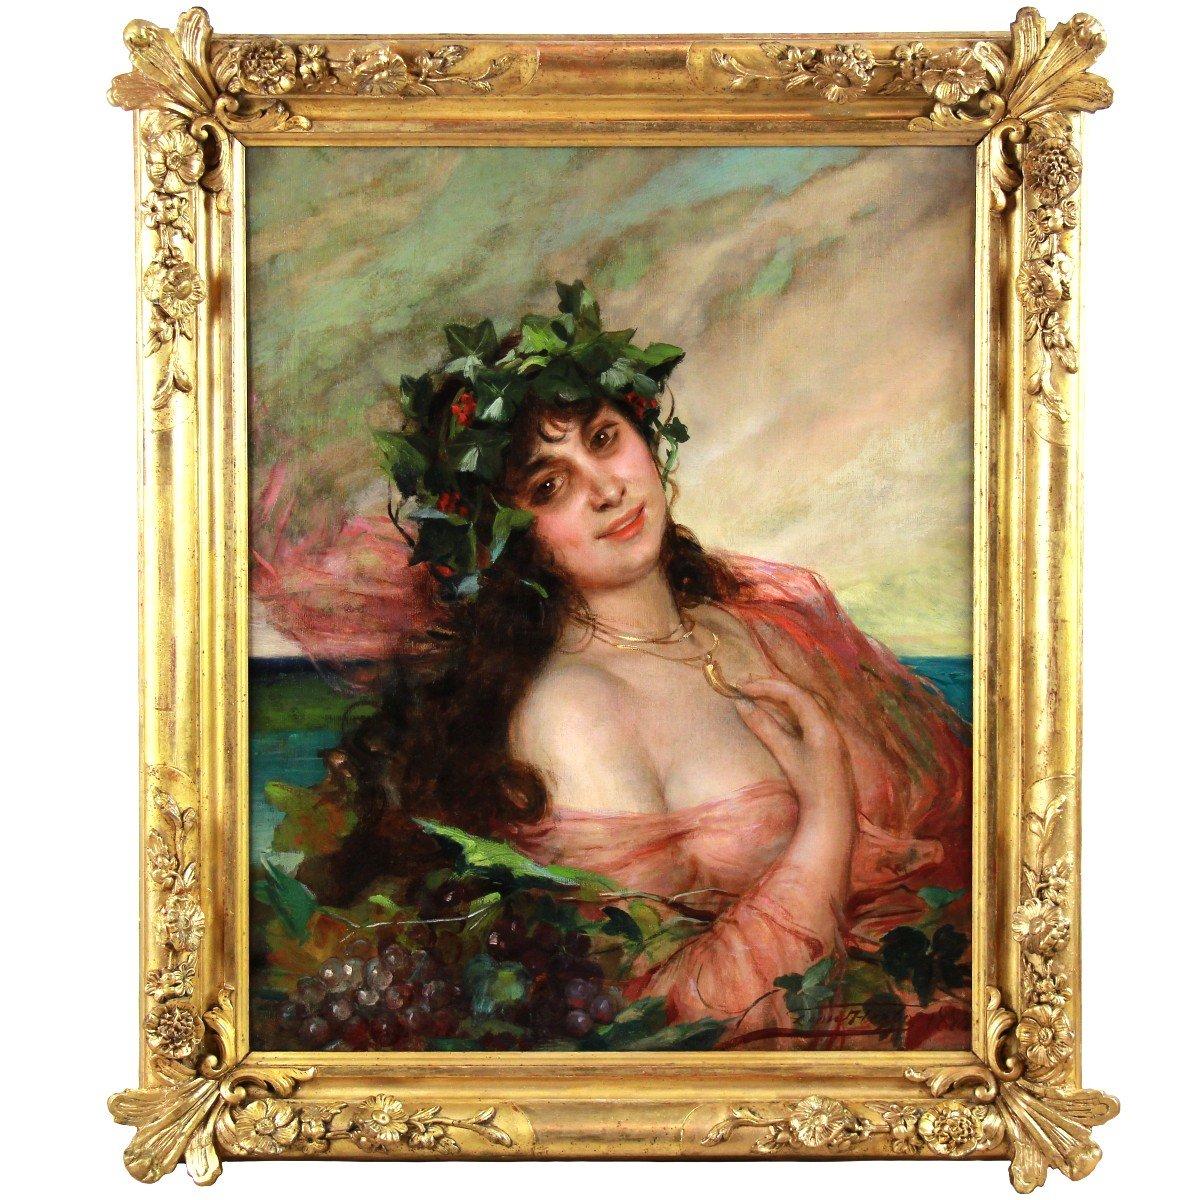 Leon Herbo Portrait Painting - Oil On Canvas, Nude "La Bacchante" dated 1885 and signed by Léon Herbo